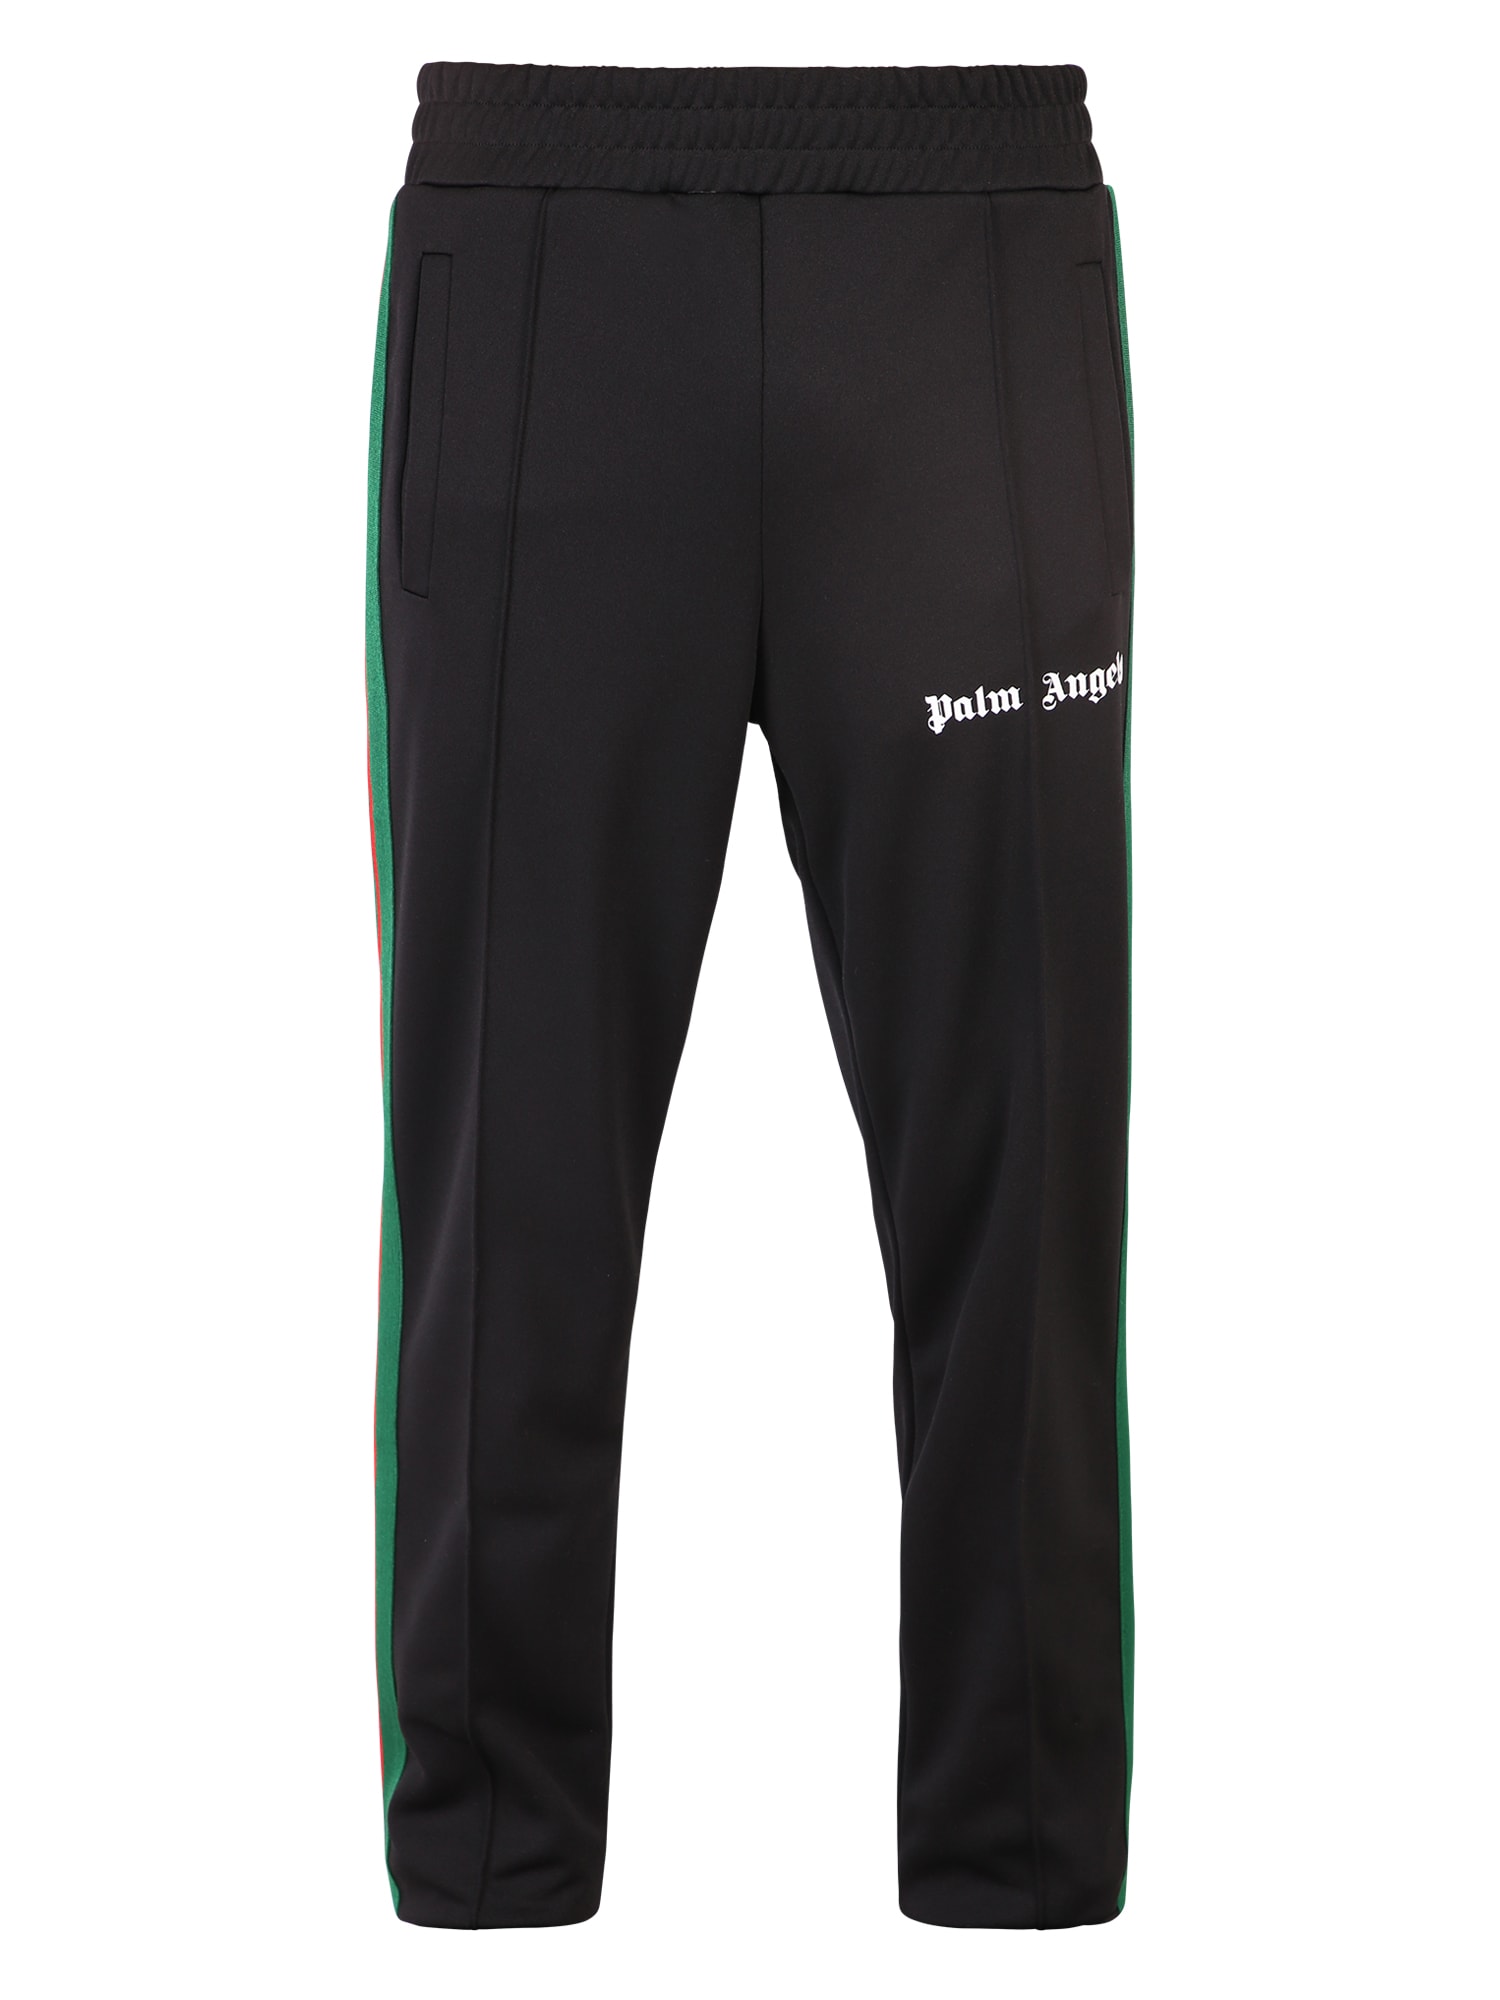 PALM ANGELS TRACK TROUSERS,PMCA007R21 FAB003 1001